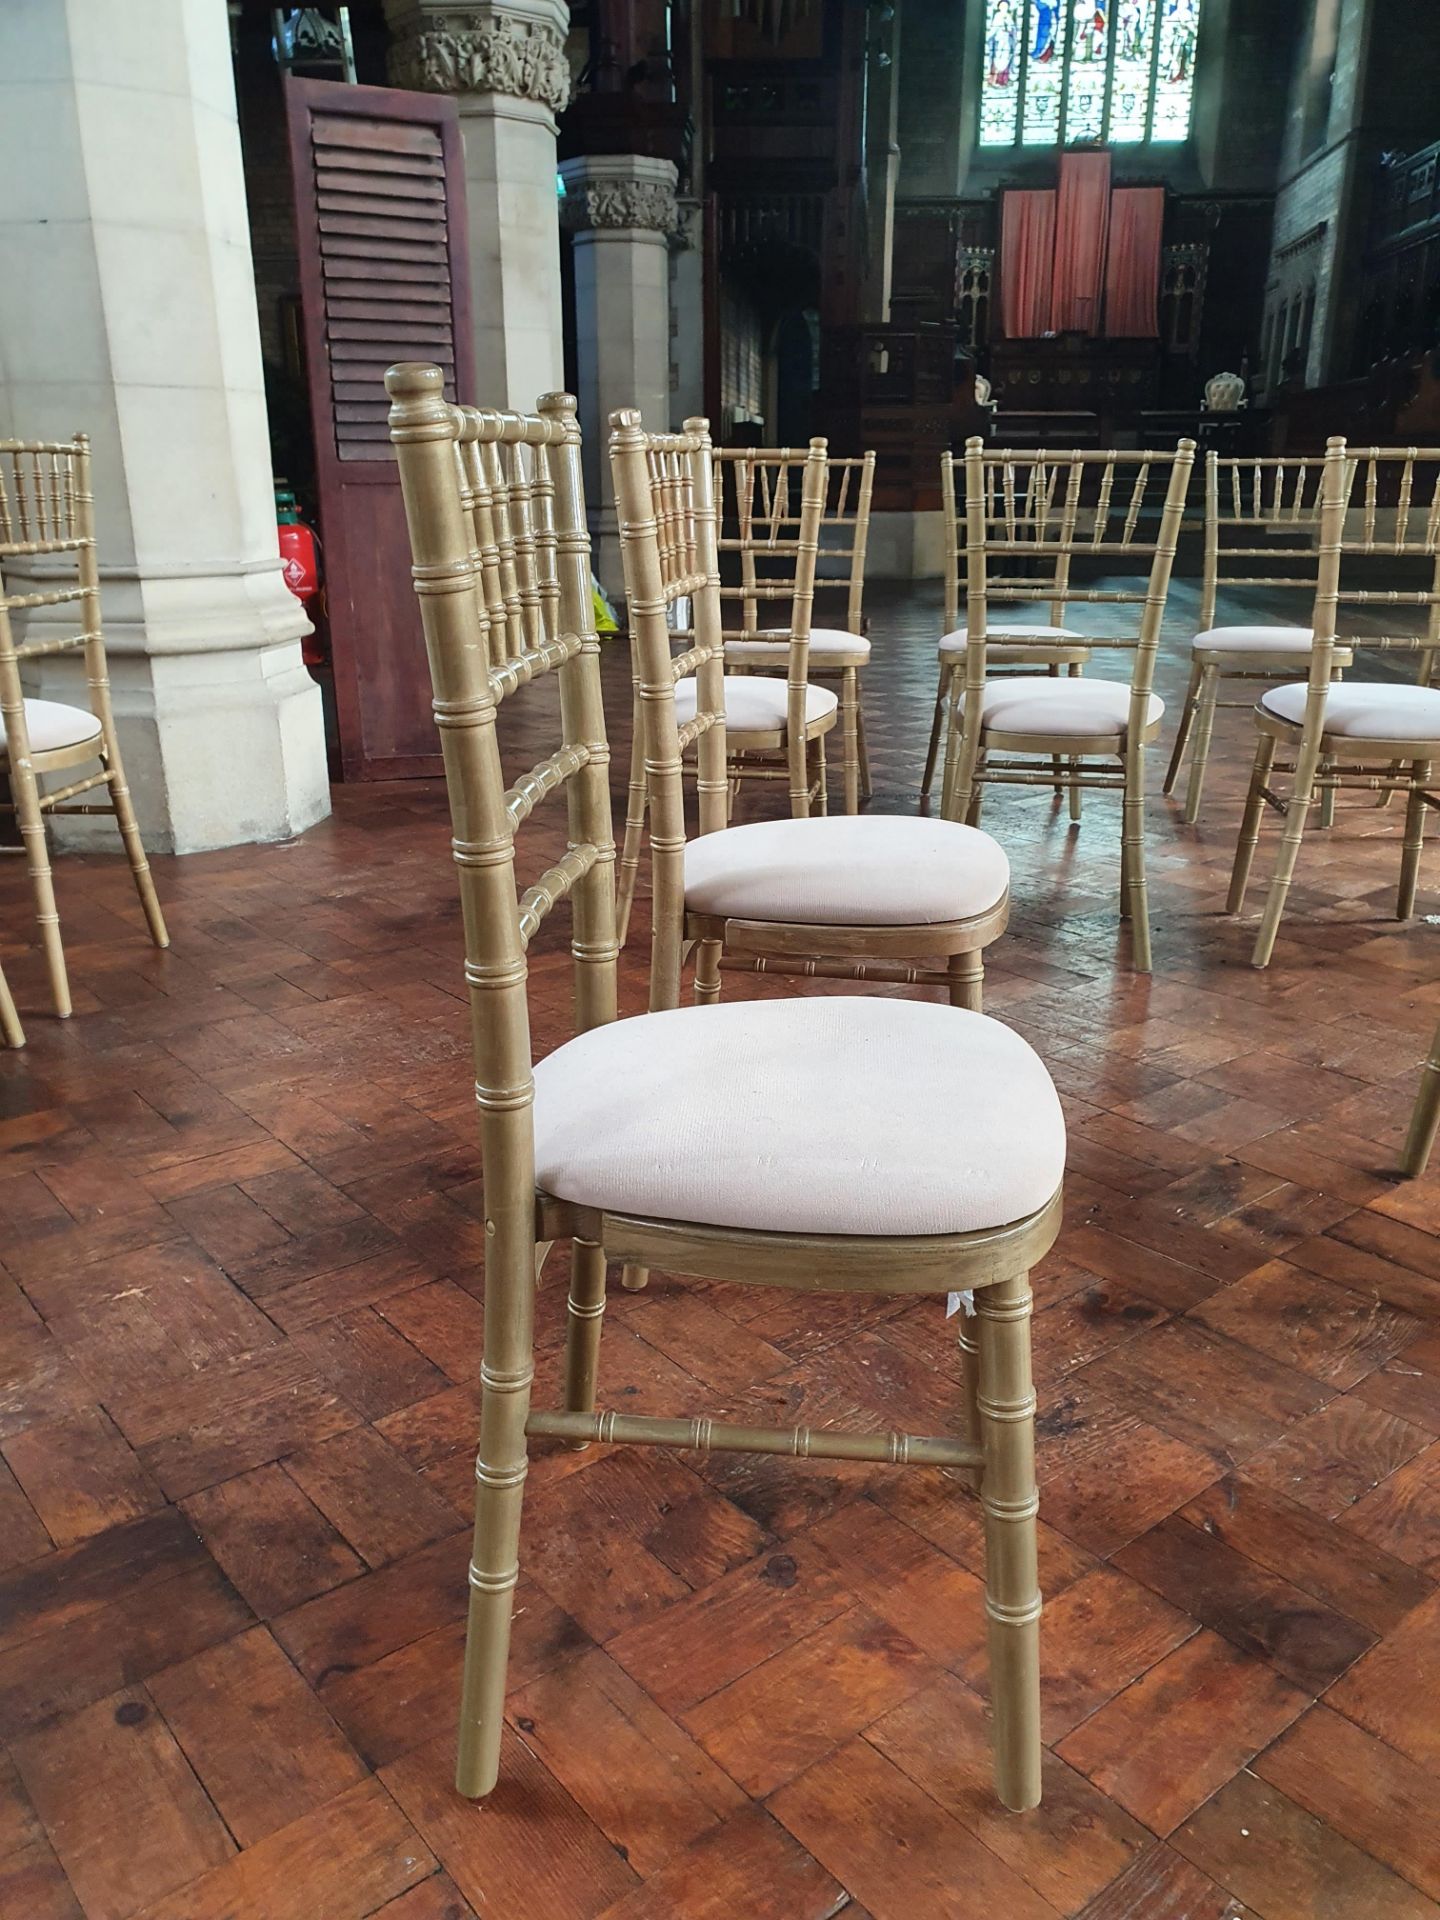 50 x Gold wash Chiavari chairs with cushion - CL573 - Location: Leicester LE1